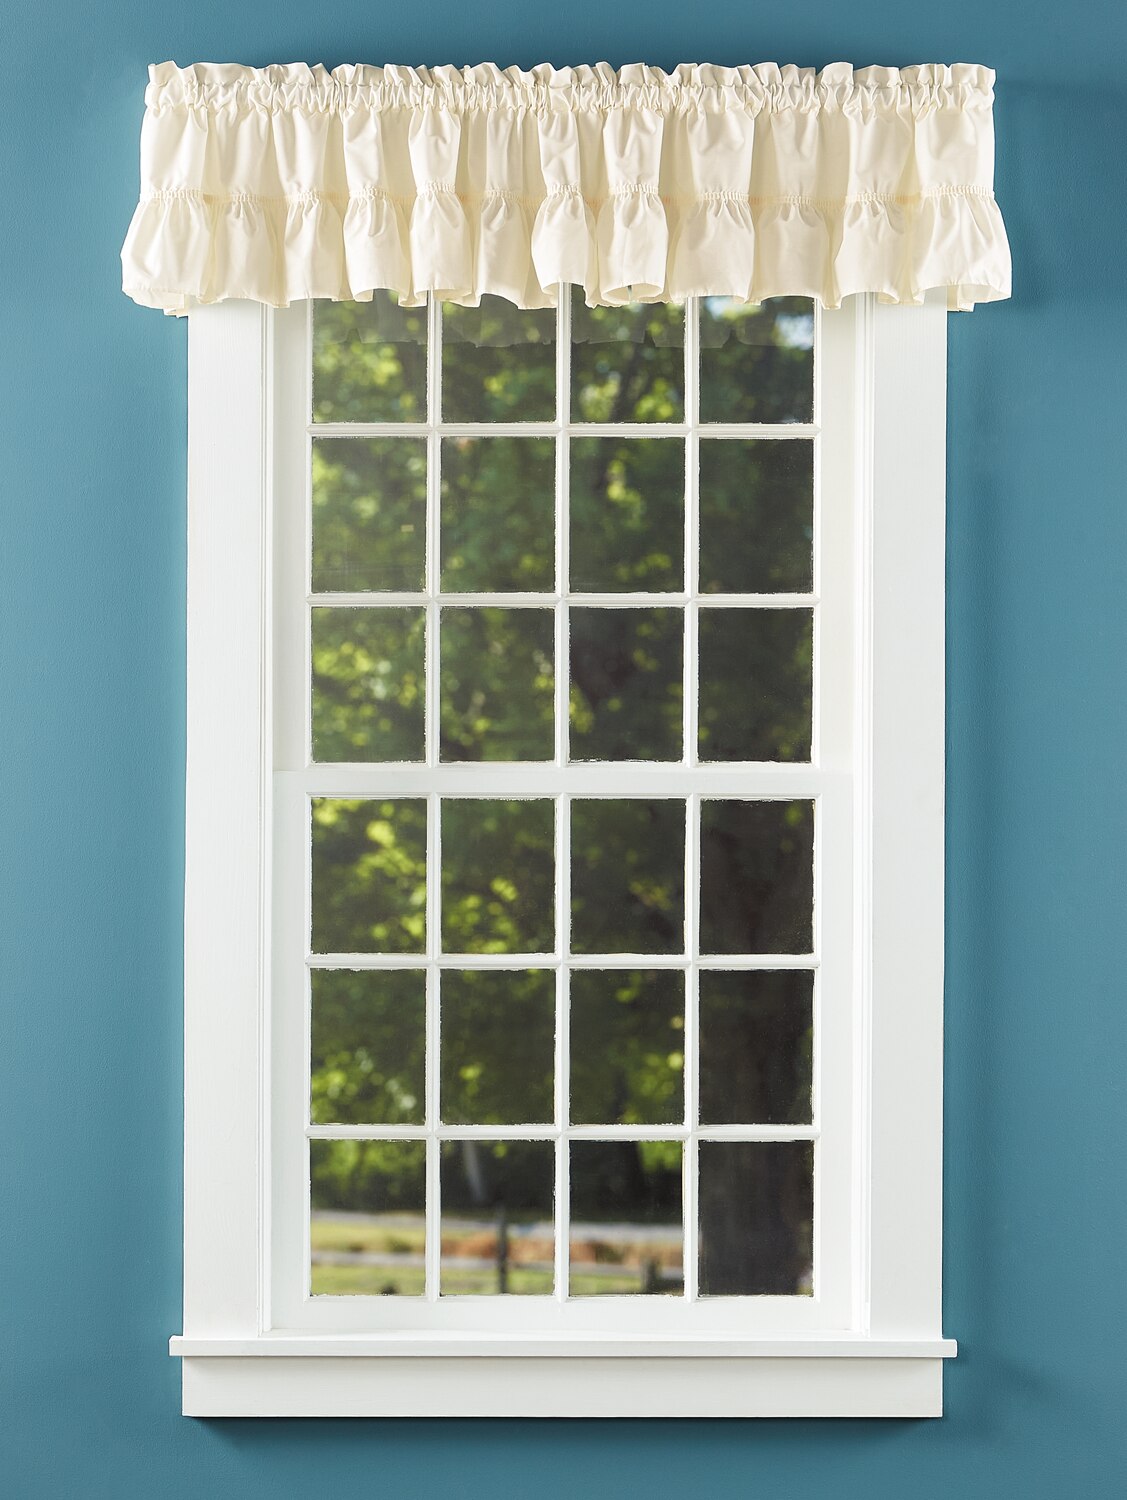 Details about   Rose Tree MONTCLAIR Cream Black Tailored Valance NEW 